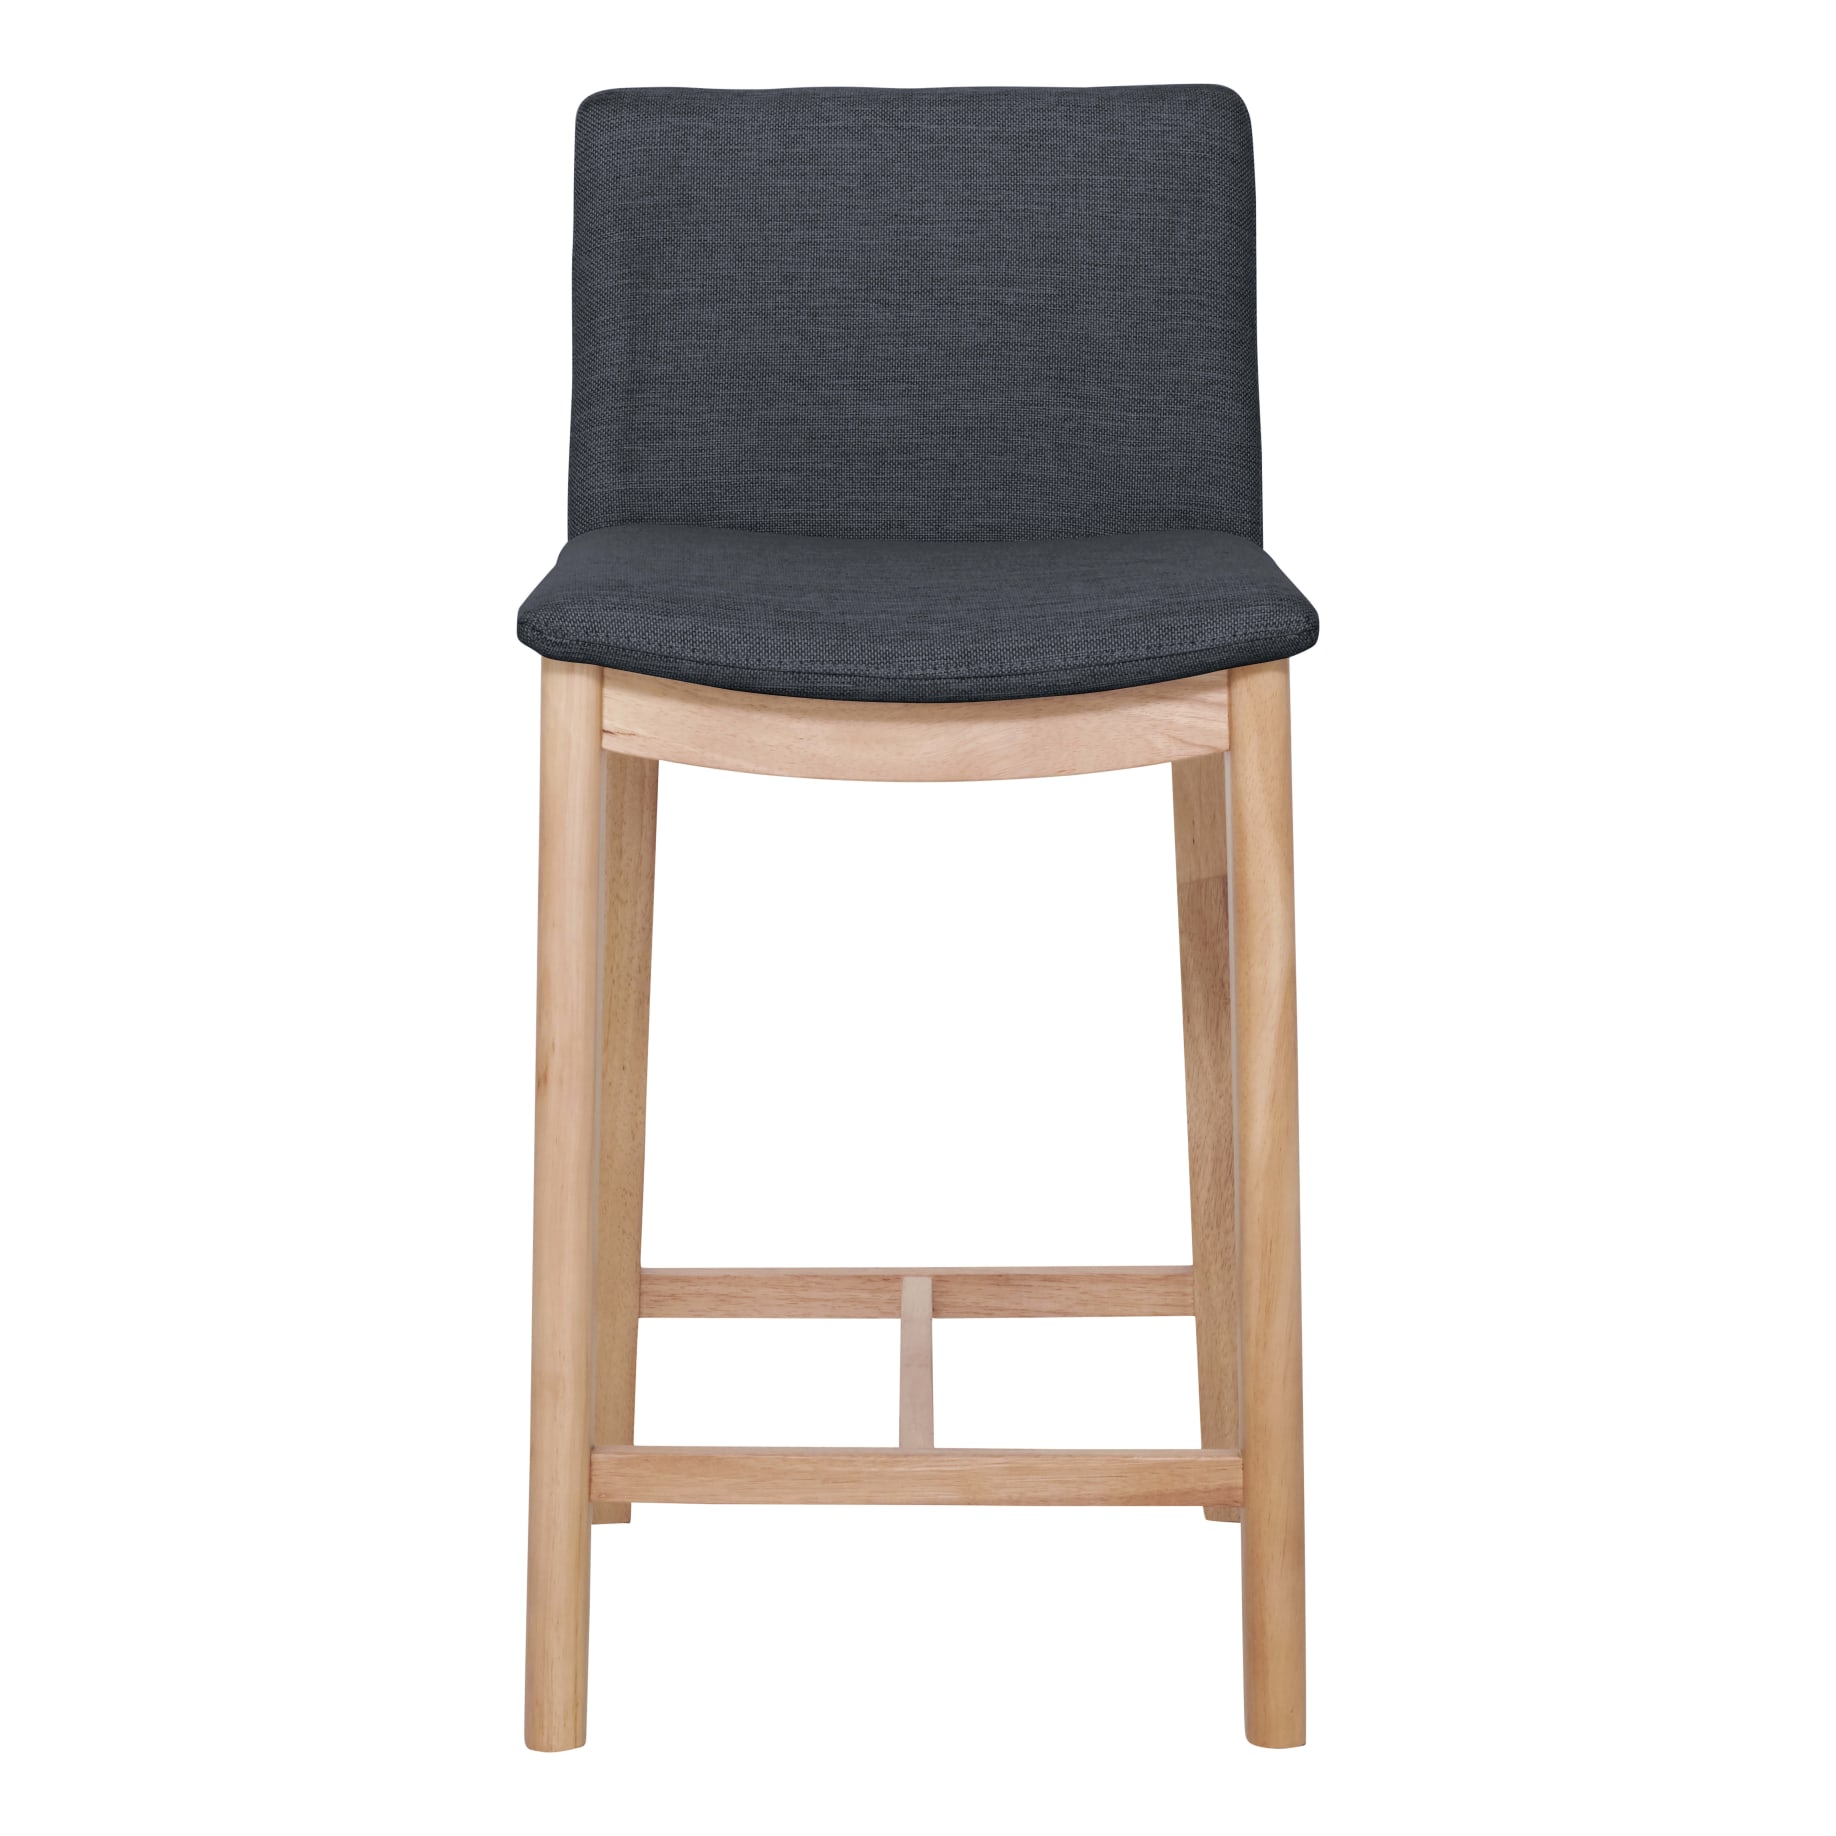 Everest Bar Chair in City Grey Fabric / Oak Stain